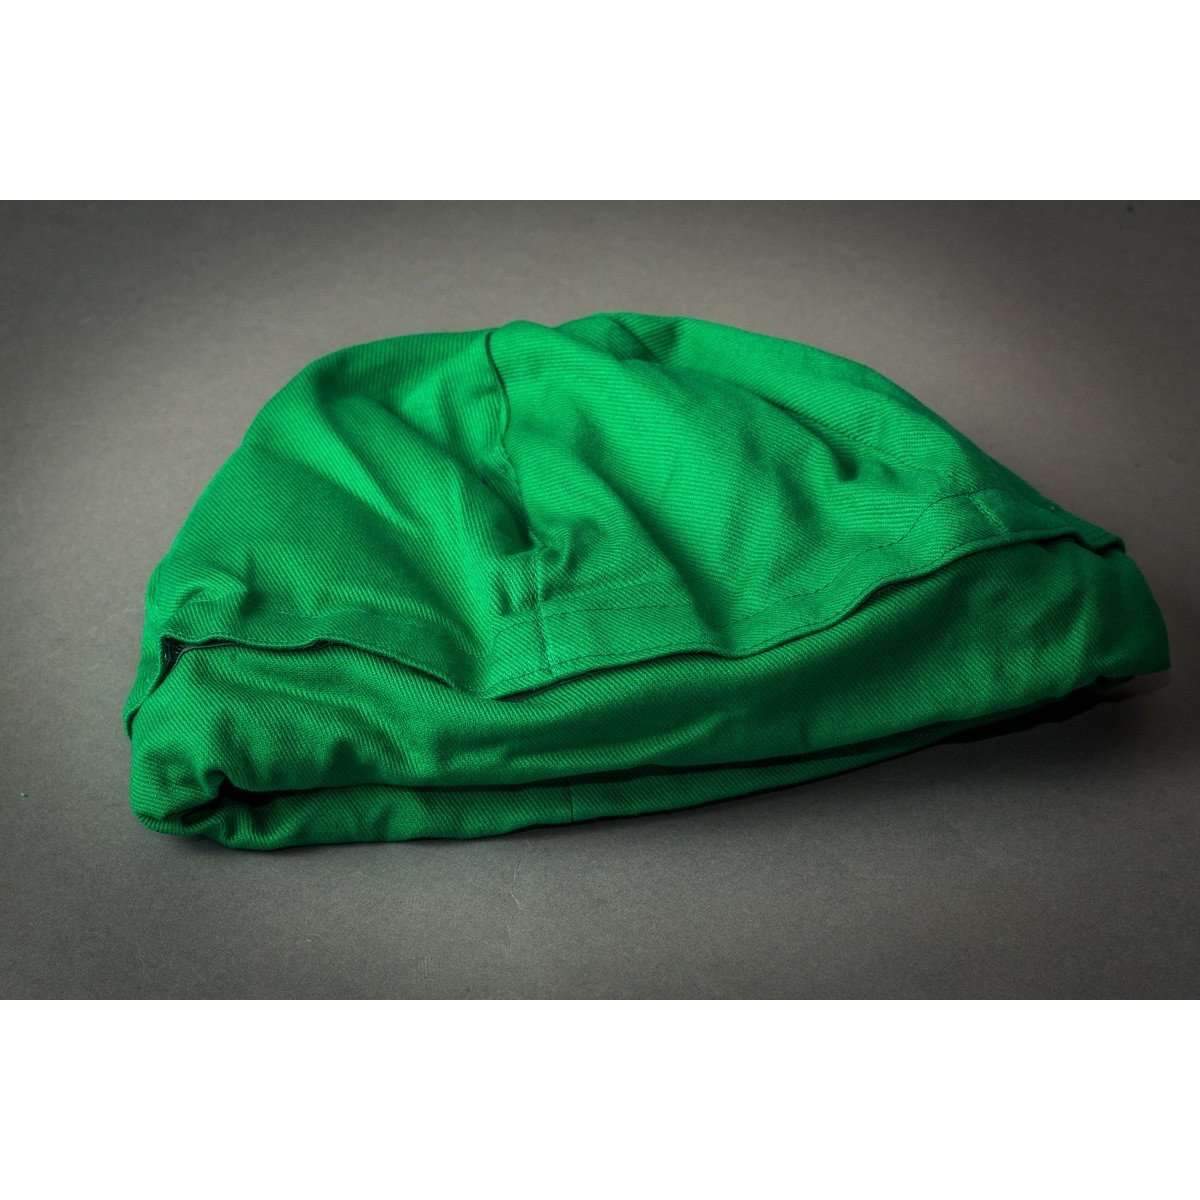 A look at the side of the green Weighted Hat.